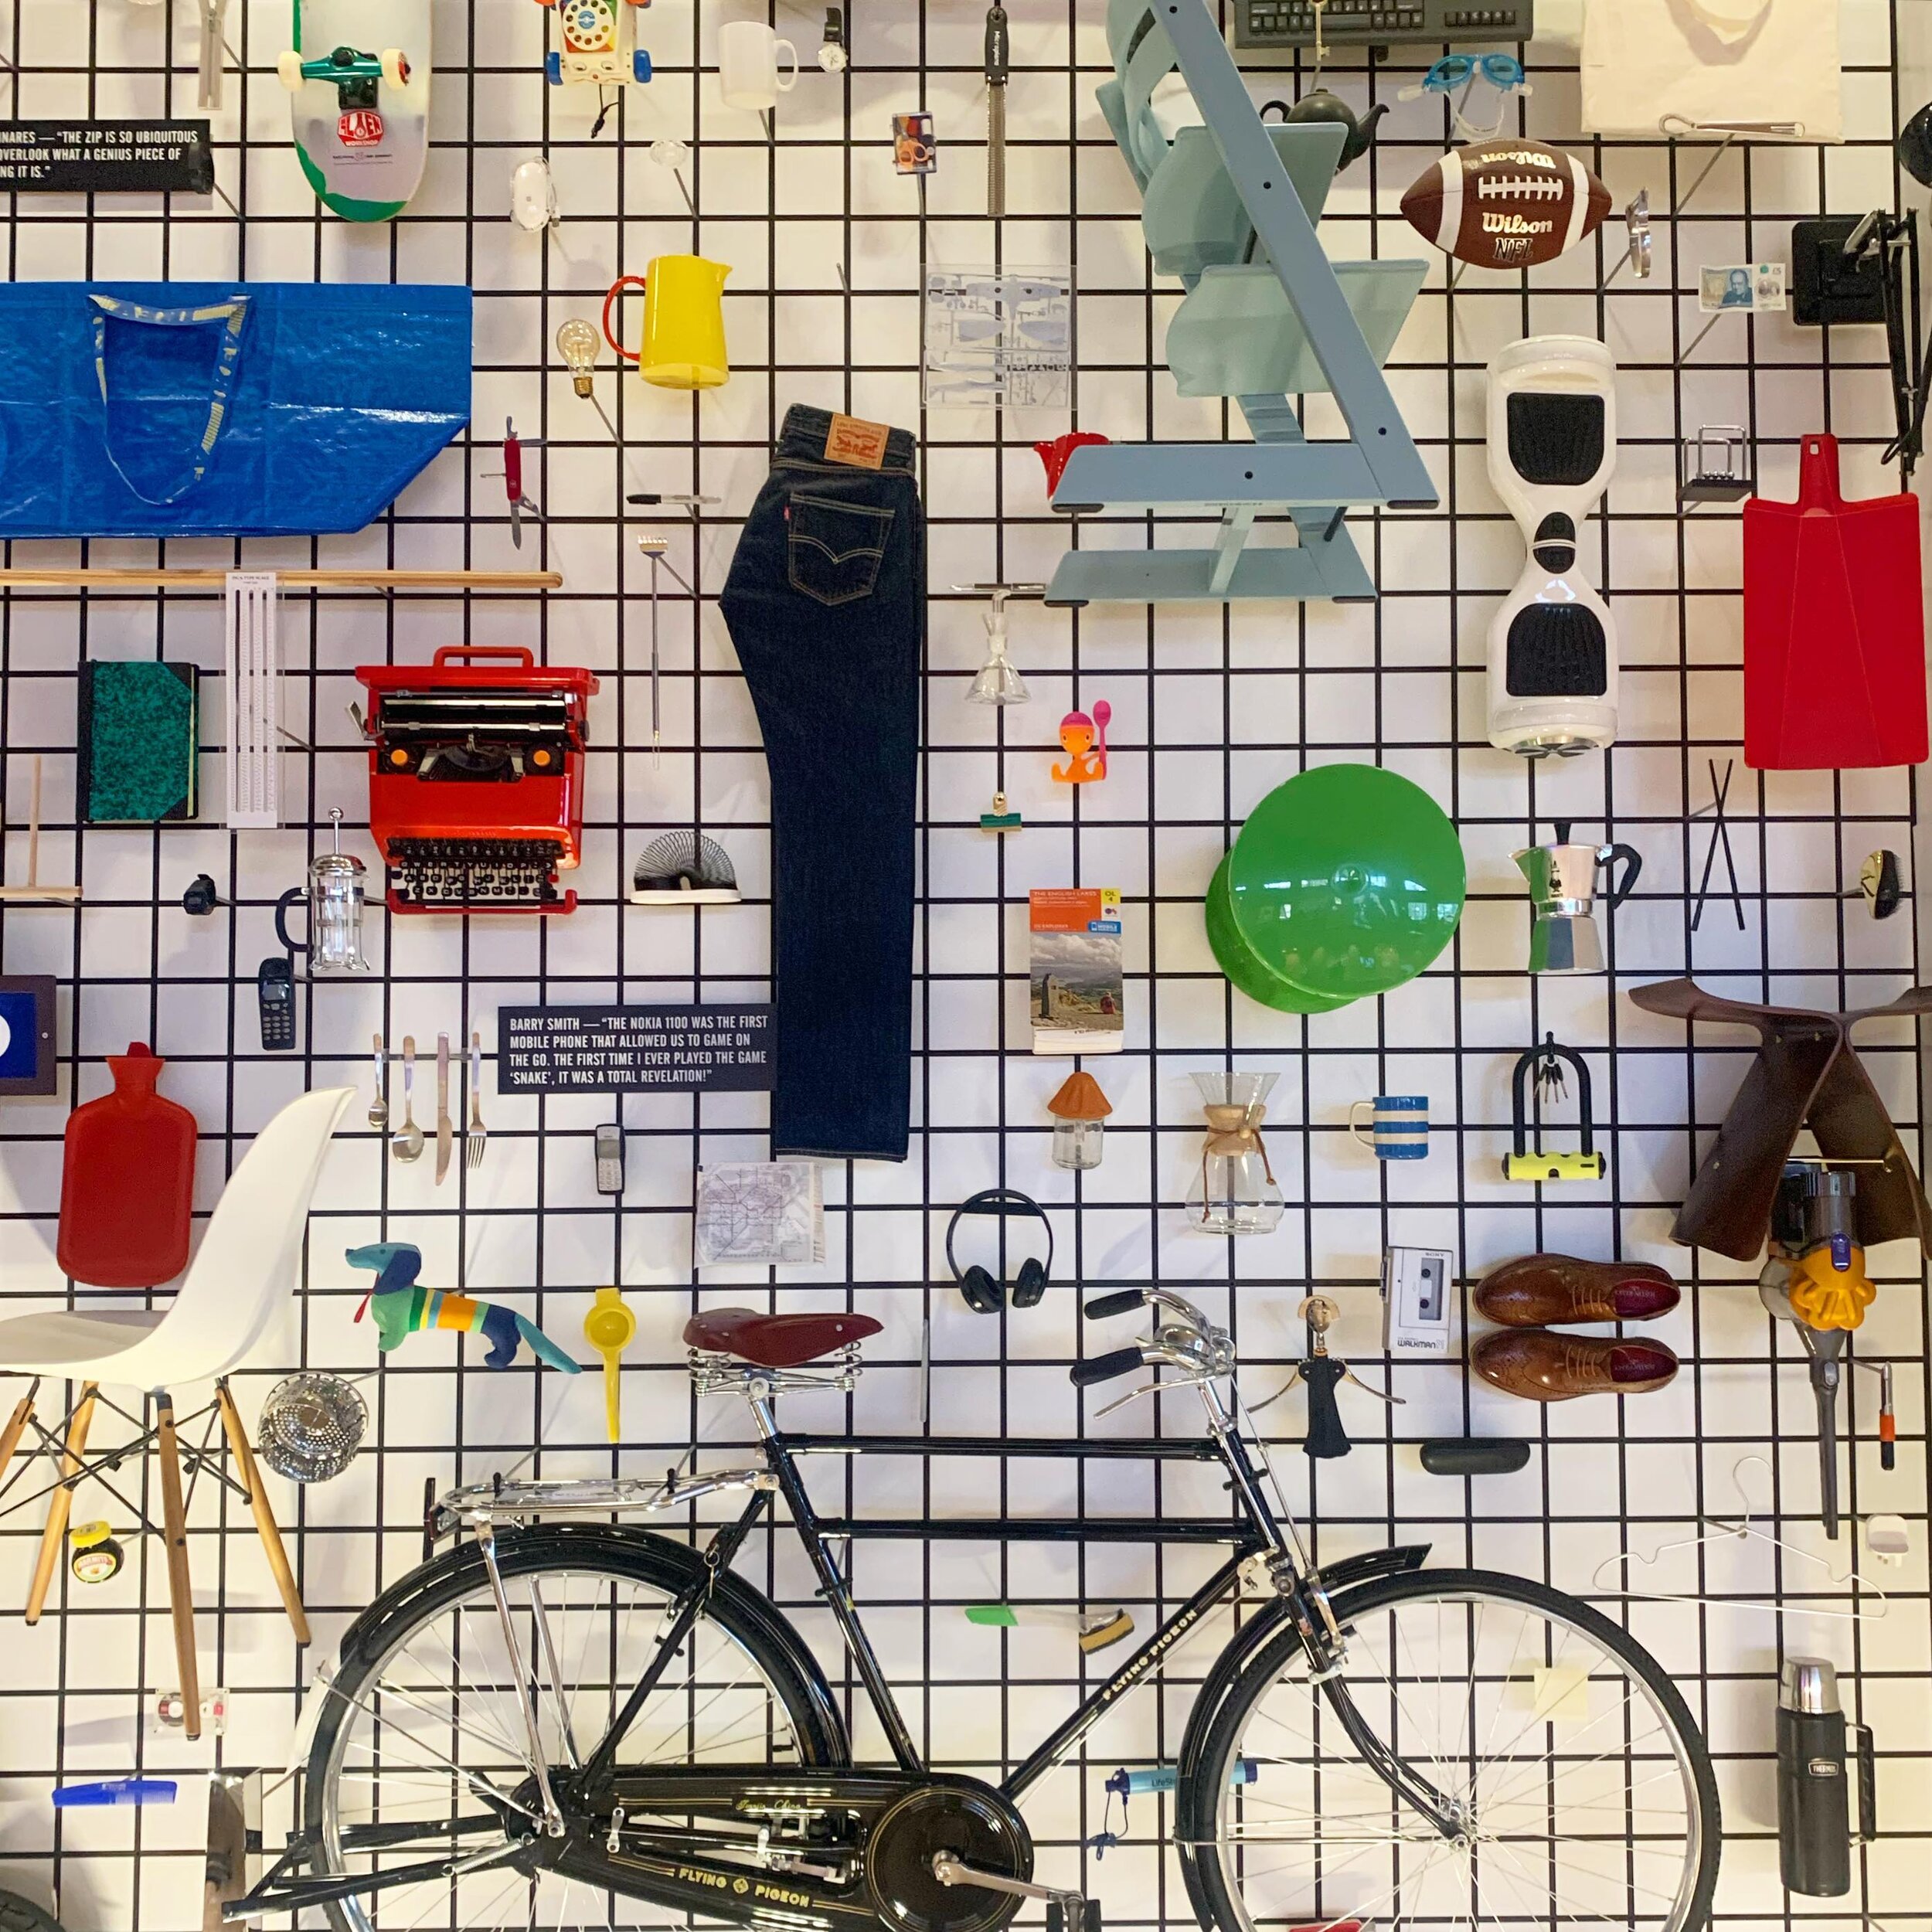 🚲 Designer. Maker. User. @designmuseum 

The permanent exhibit at the Design Museum in London is still one of my favourites (and I swear it&rsquo;s not just because there is a whole section about graphic design. Okay, maybe that is why I love it&hel